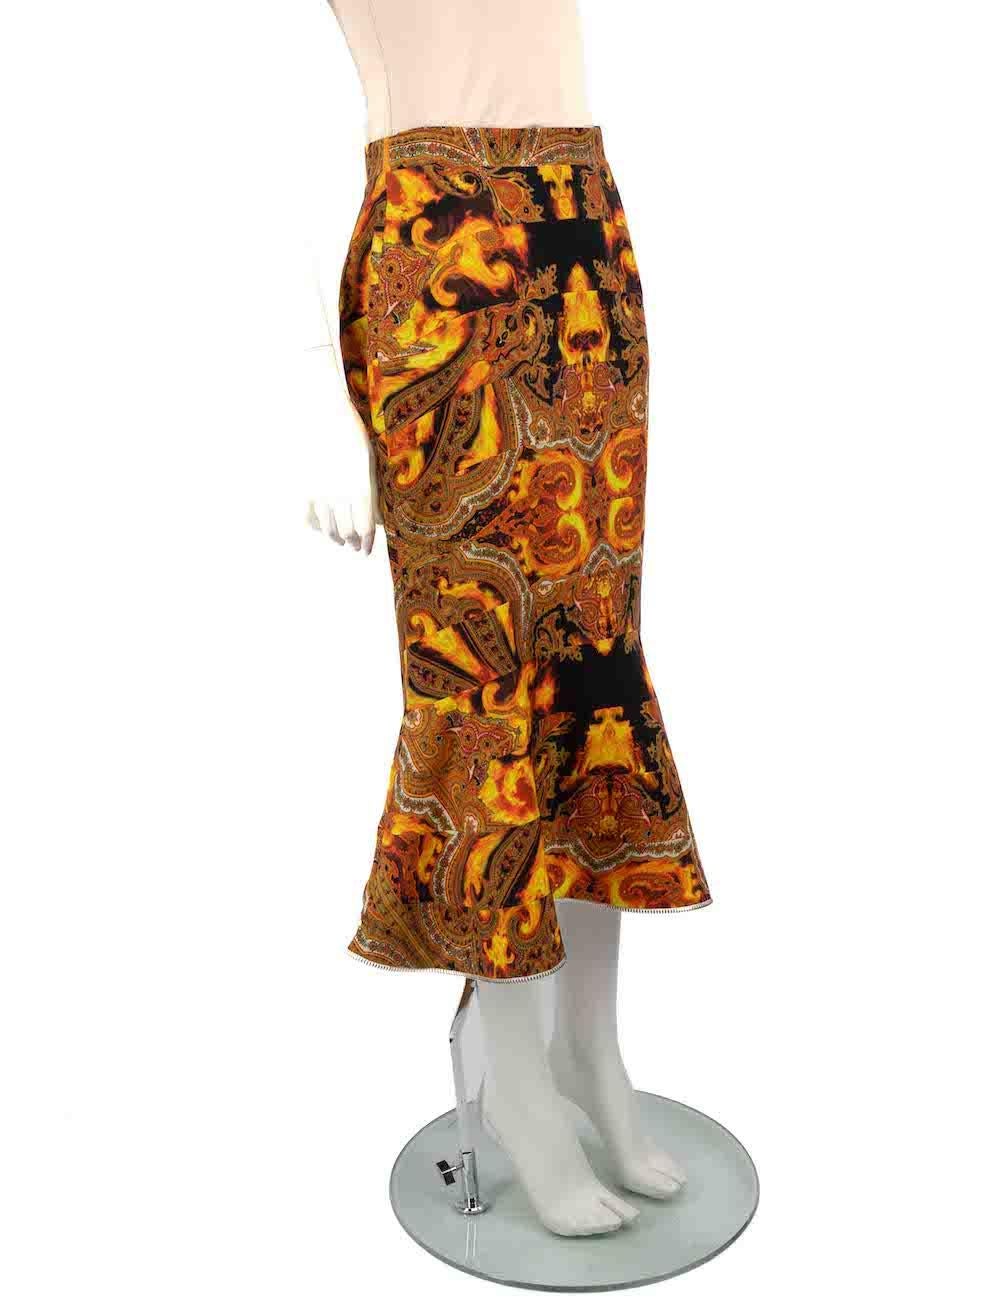 CONDITION is Very good. Hardly any visible wear to skirt is evident on this used Givenchy designer resale item.
 
 
 
 Details
 
 
 Orange
 
 Silk
 
 Skirt
 
 Flame print
 
 Midi
 
 Zip trim
 
 Flared hem
 
 Side zip and hook fastening
 
 
 
 
 
